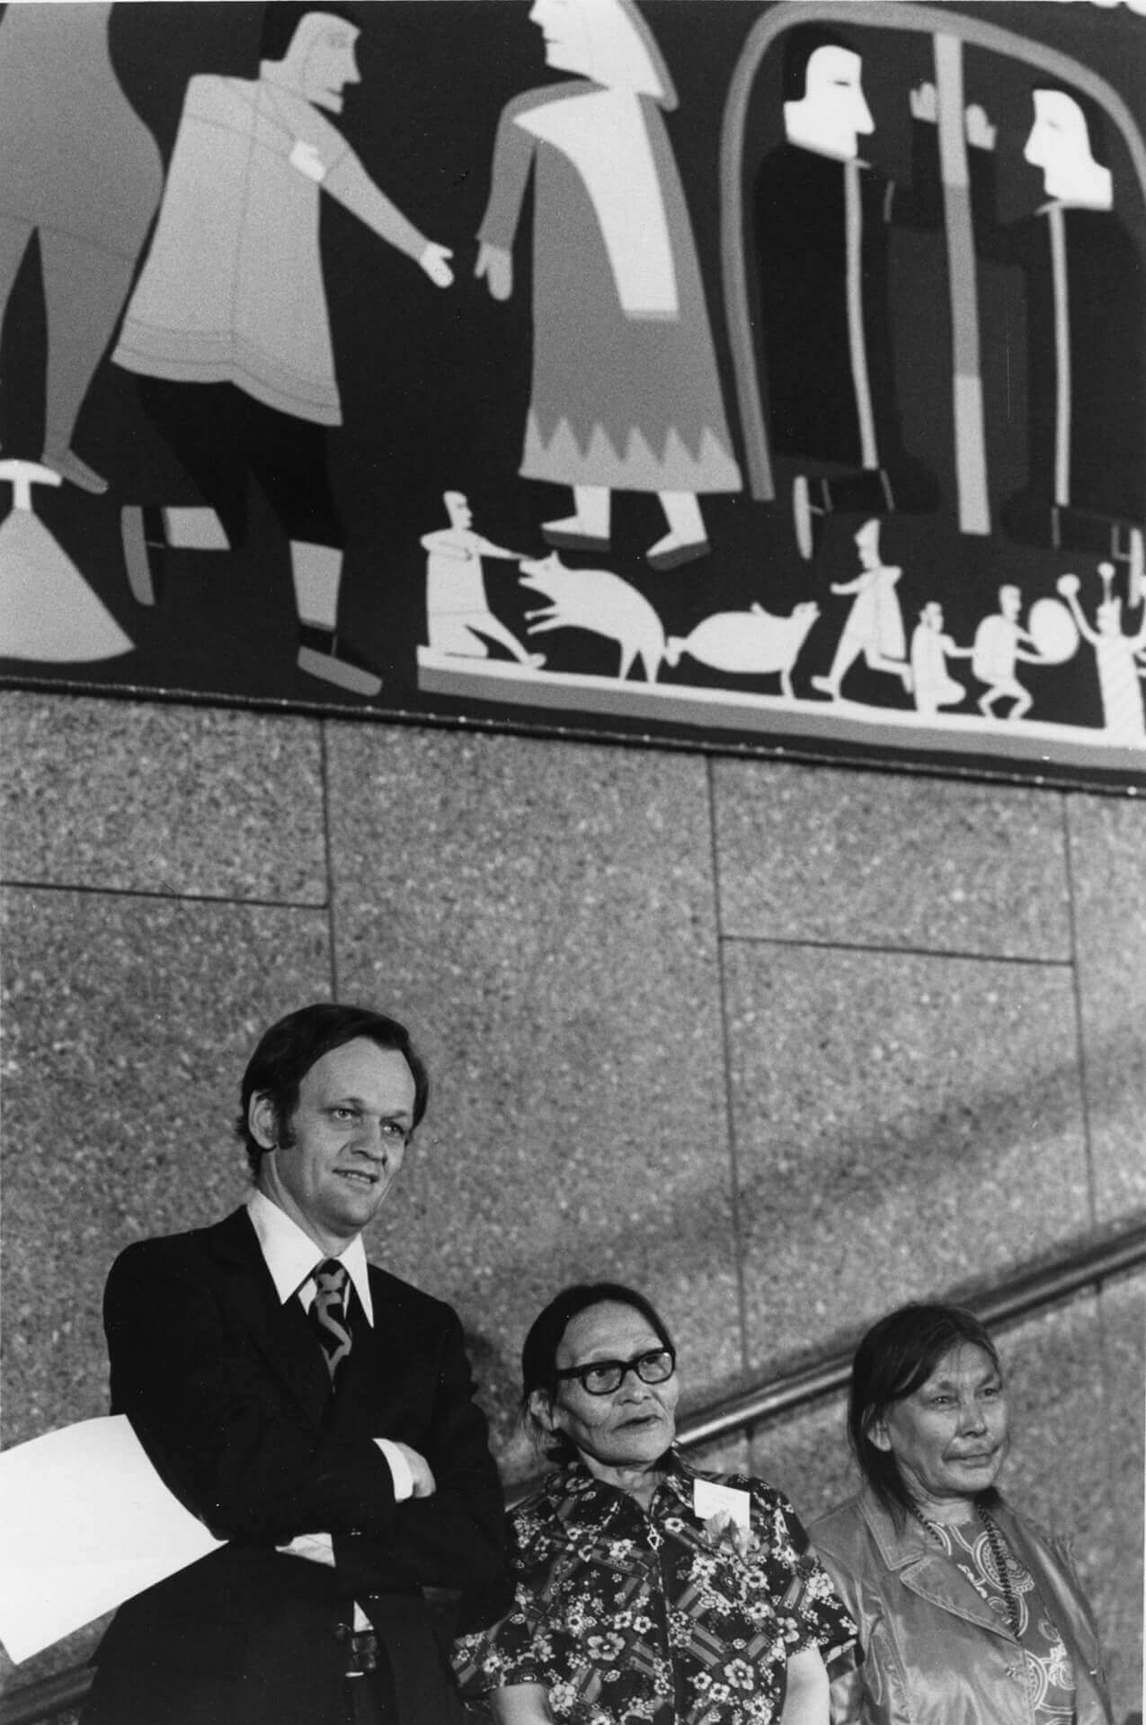 Art Canada Institute, Jean Chrétien, Pitseolak Ashoona, and Jessie Oonark at the National Arts Centre in Ottawa, 1973